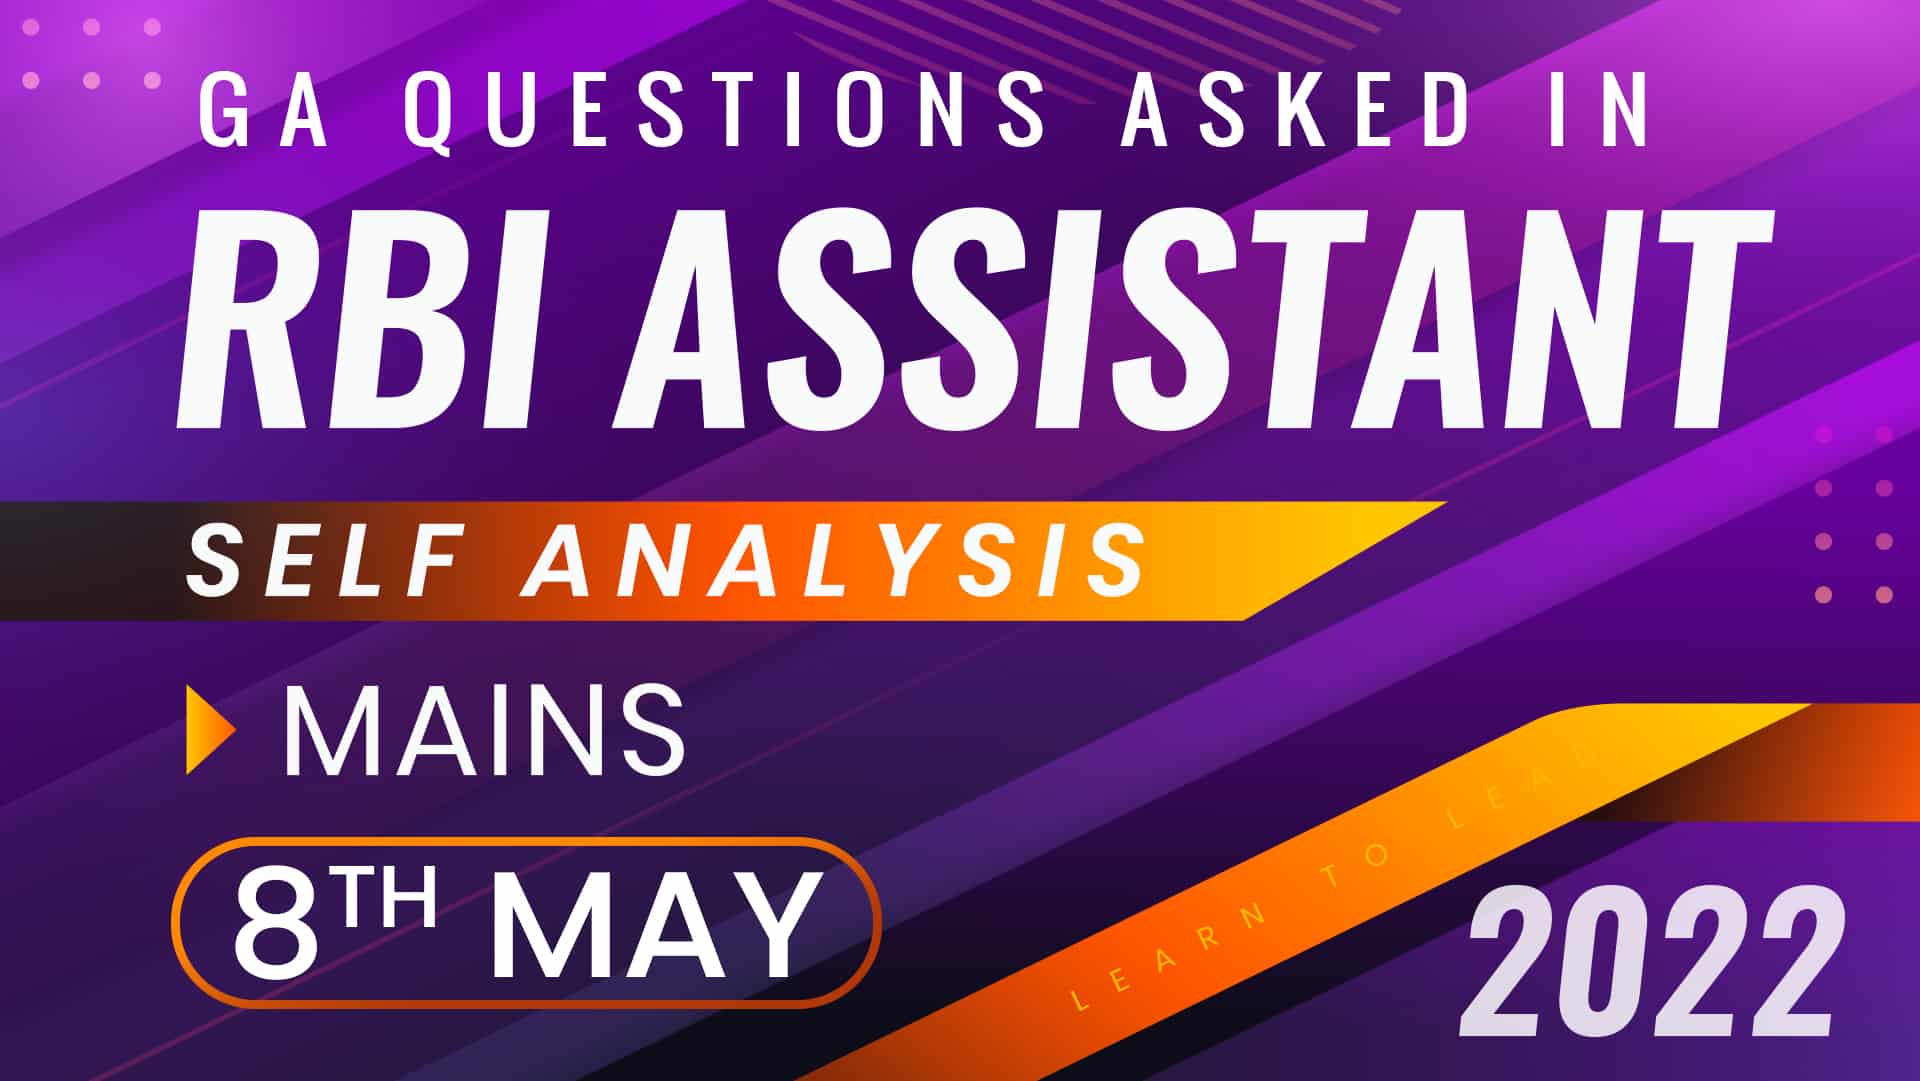 RBI ASSISTANT MAIN SELF ANALYSIS QUANTS AND REASONNING